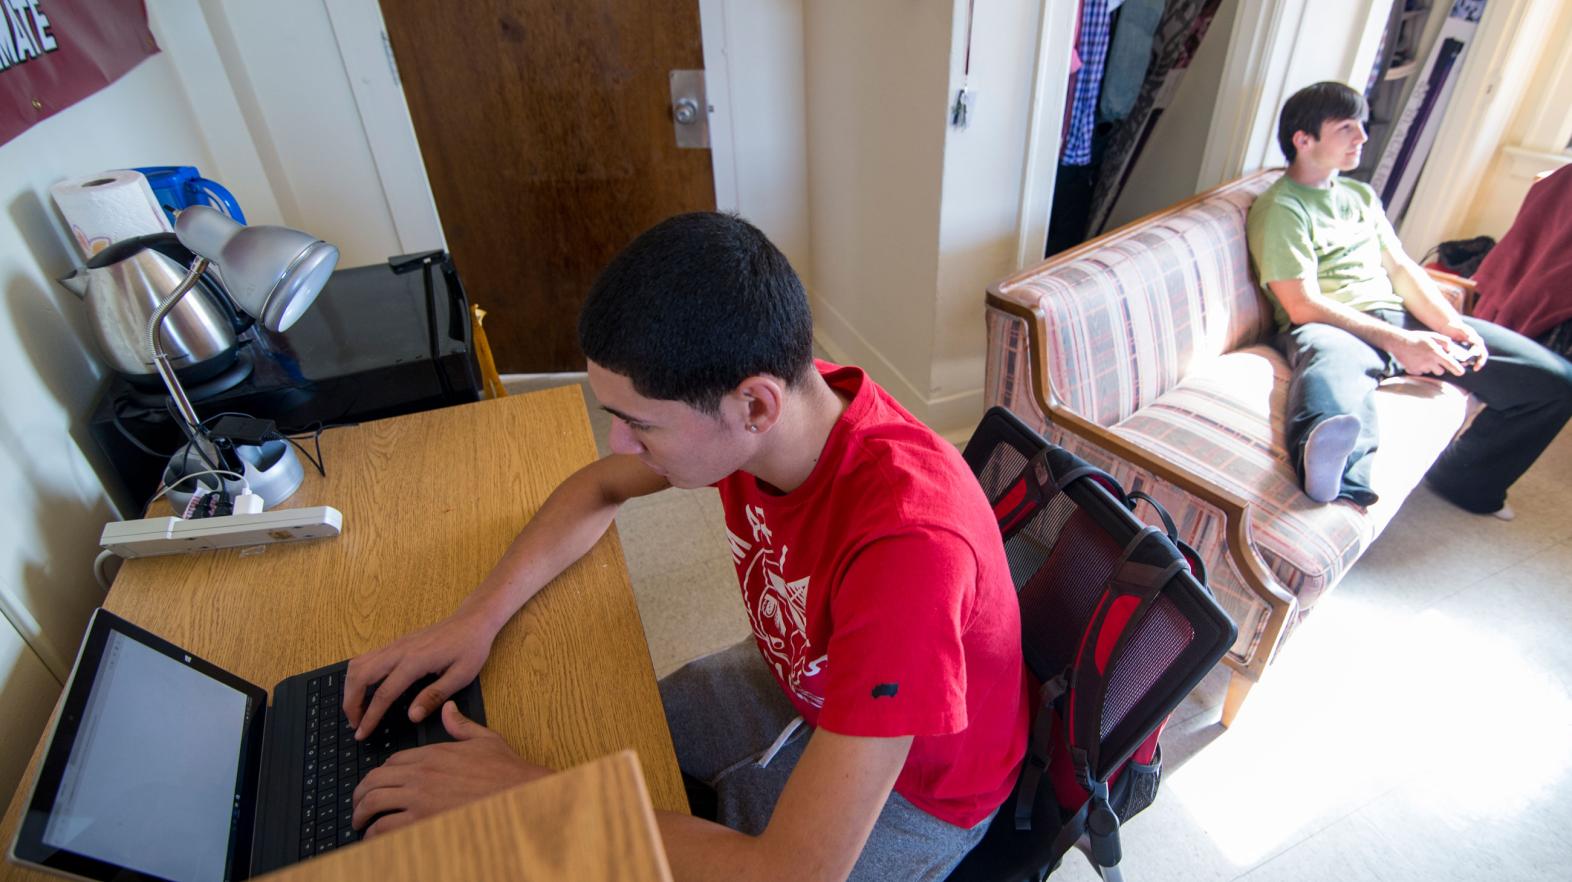 A student sites at his desk to work on his laptop while his roommate plays video games in their residence hall room.